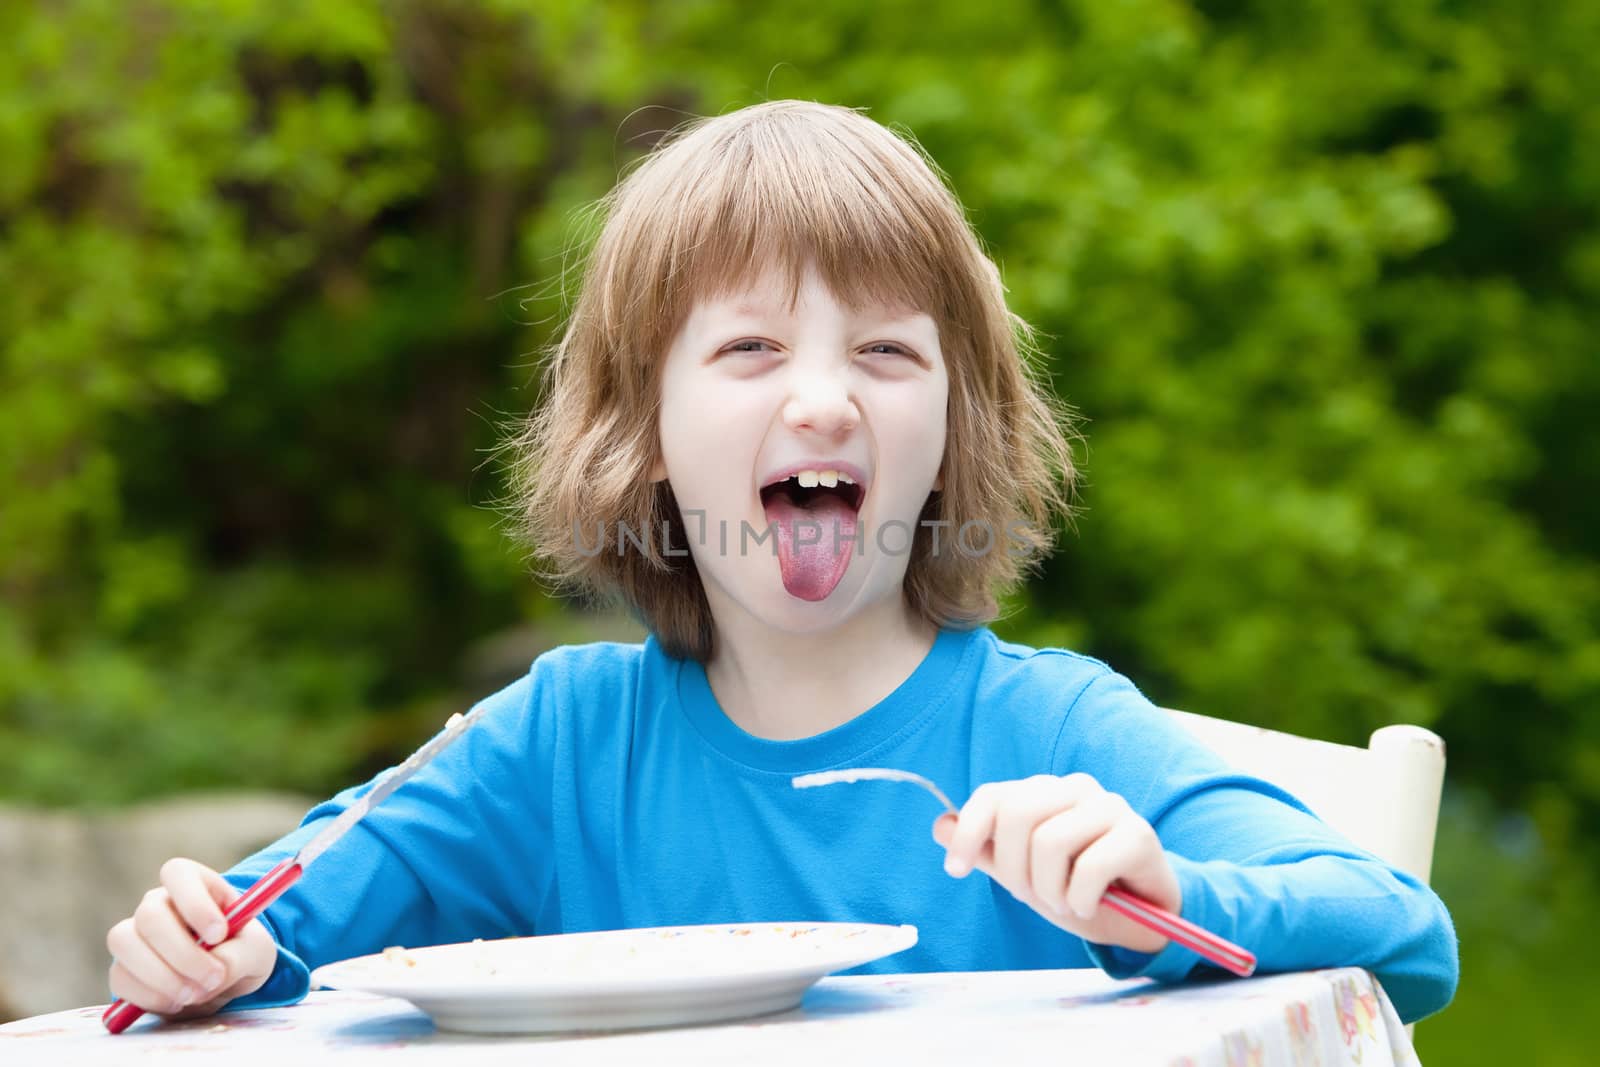 Blond Boy Eating Sticking out his Tongue